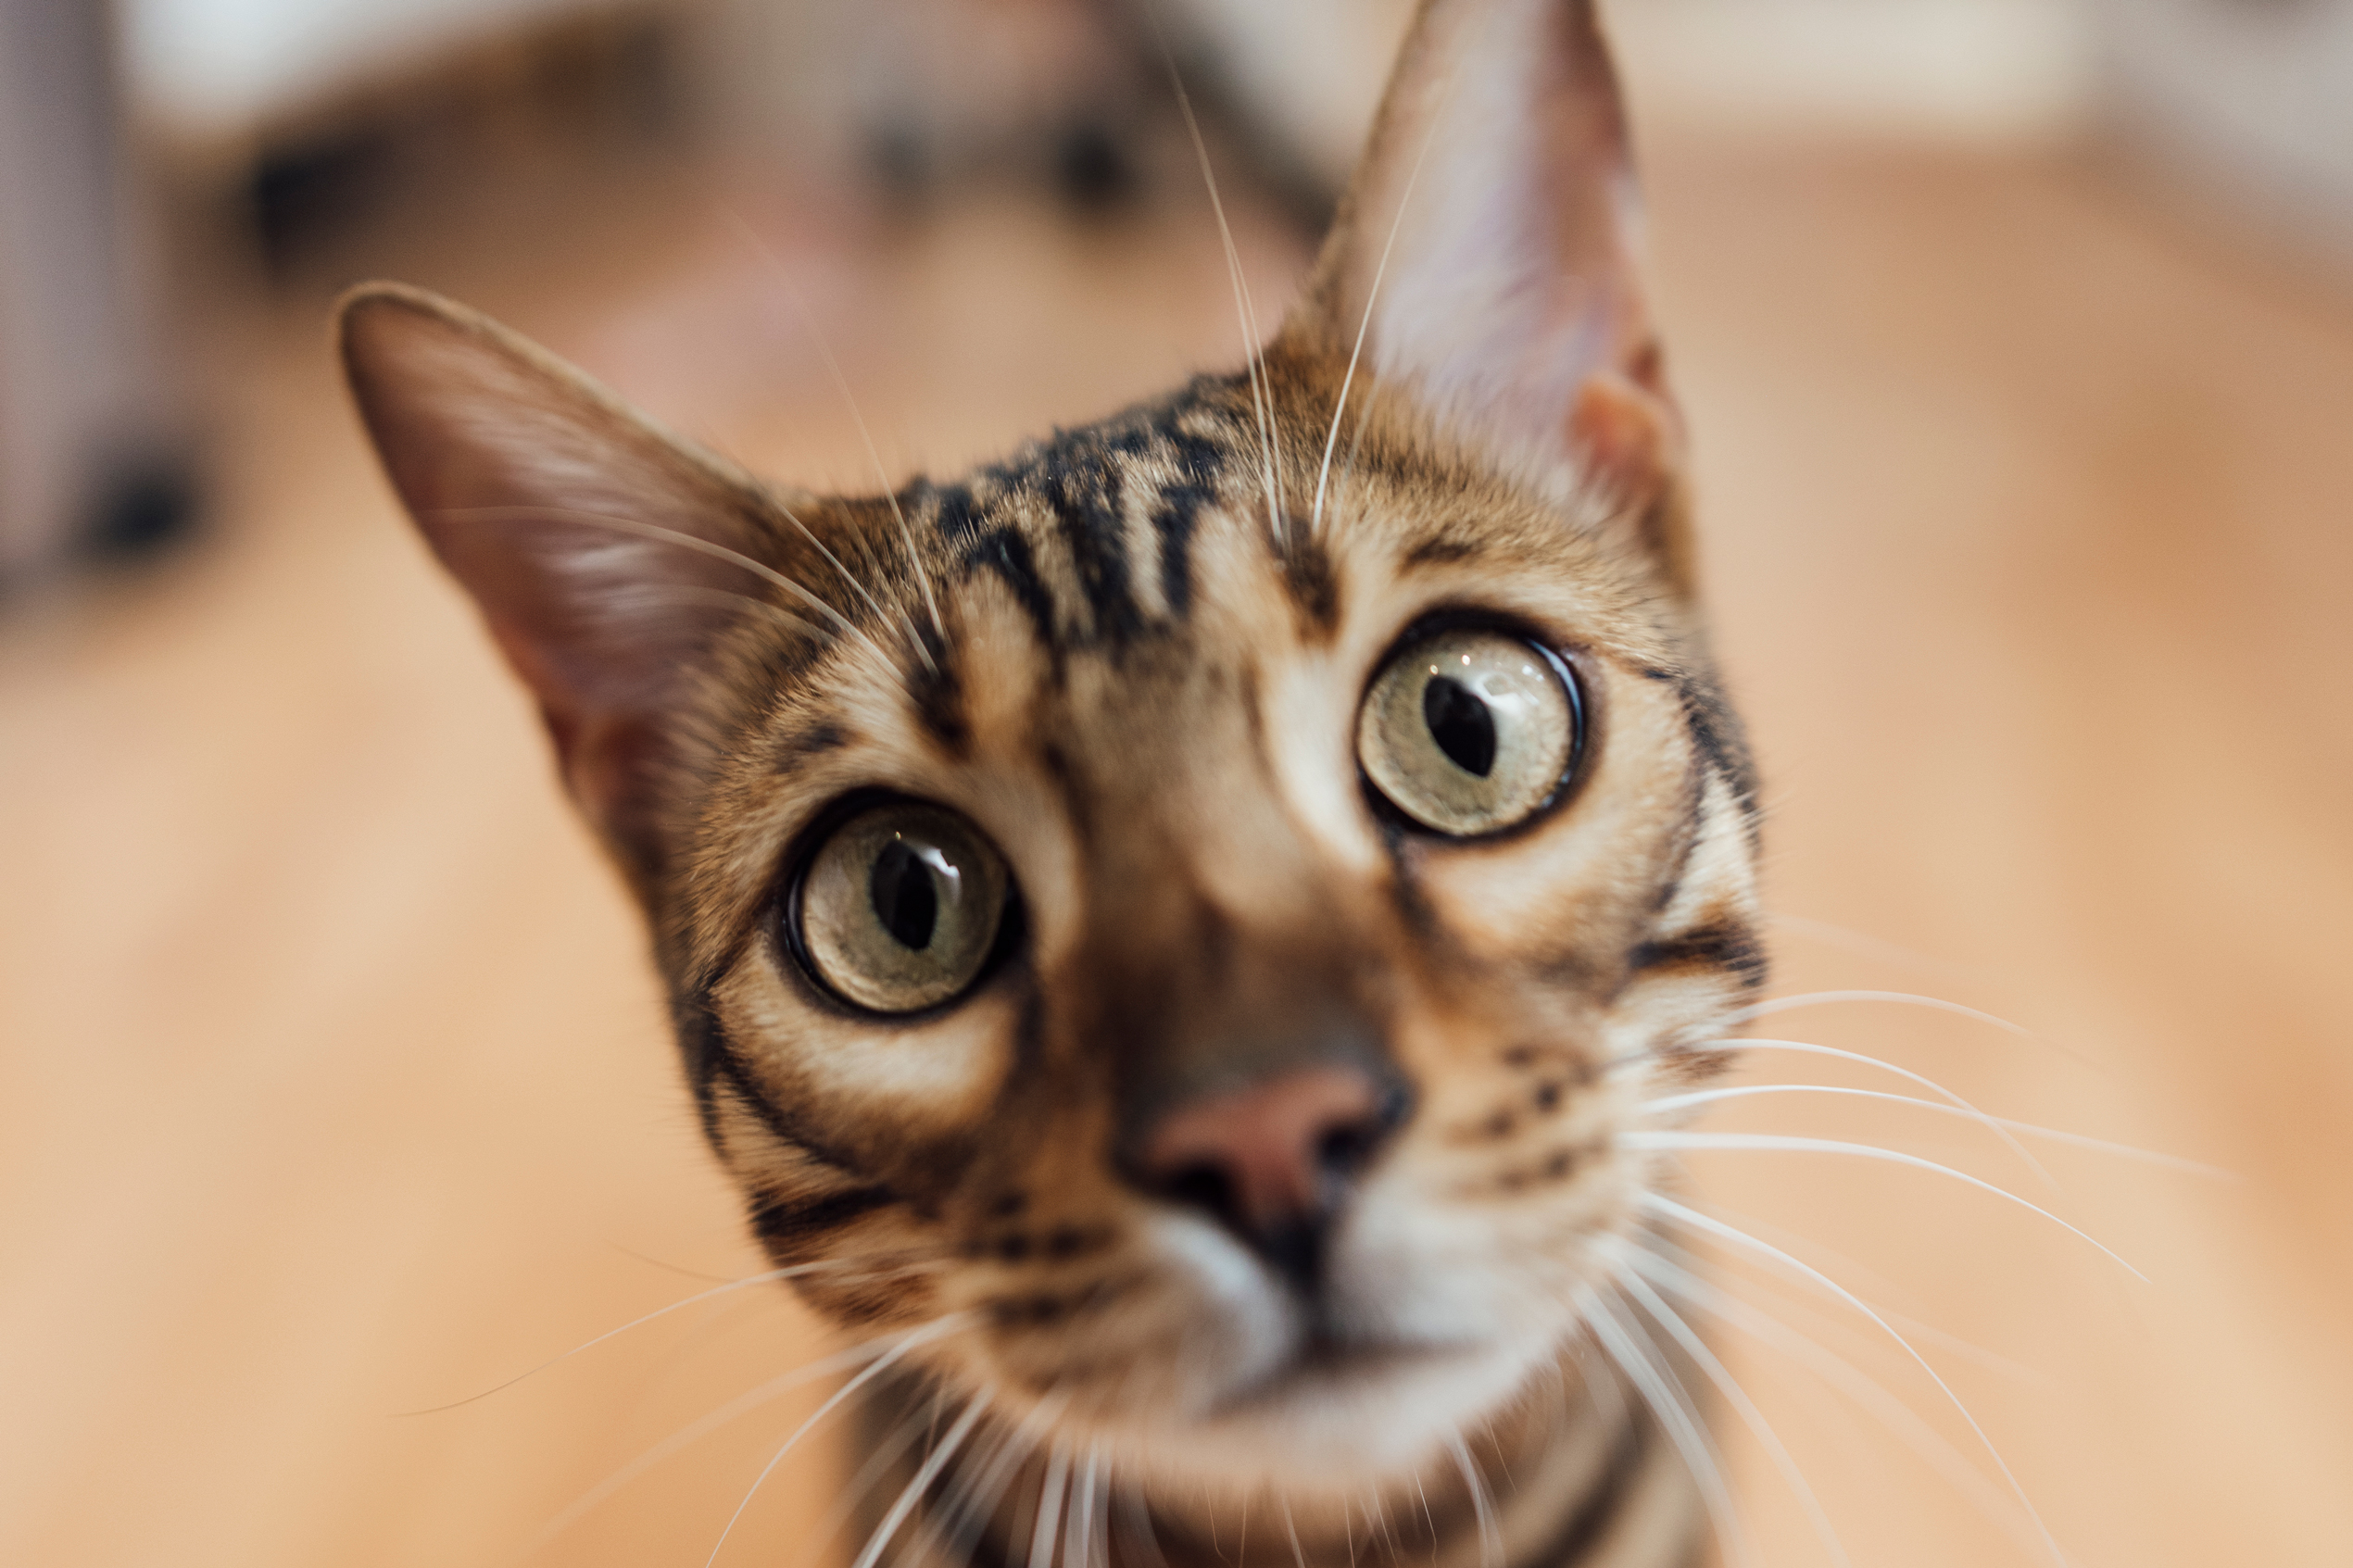 Cat Owners Can Read their Cat(s) Facial Expressions-The Great Cat